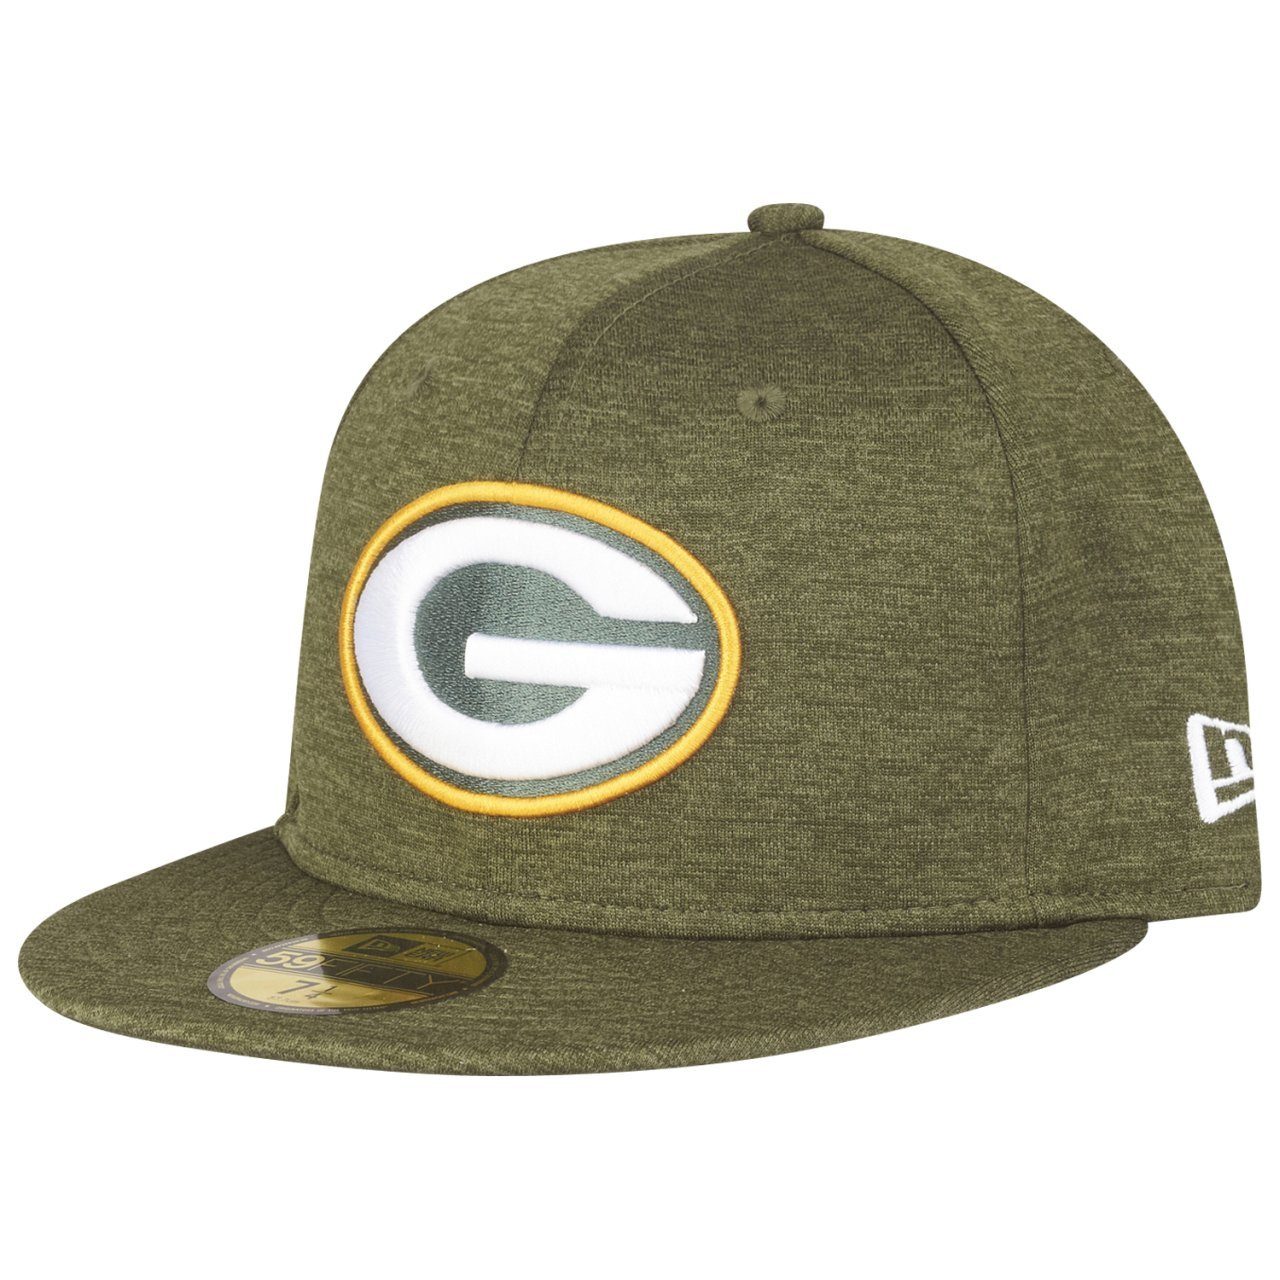 New Era Fitted Cap SHADOW TECH Packers 59Fifty Green Bay